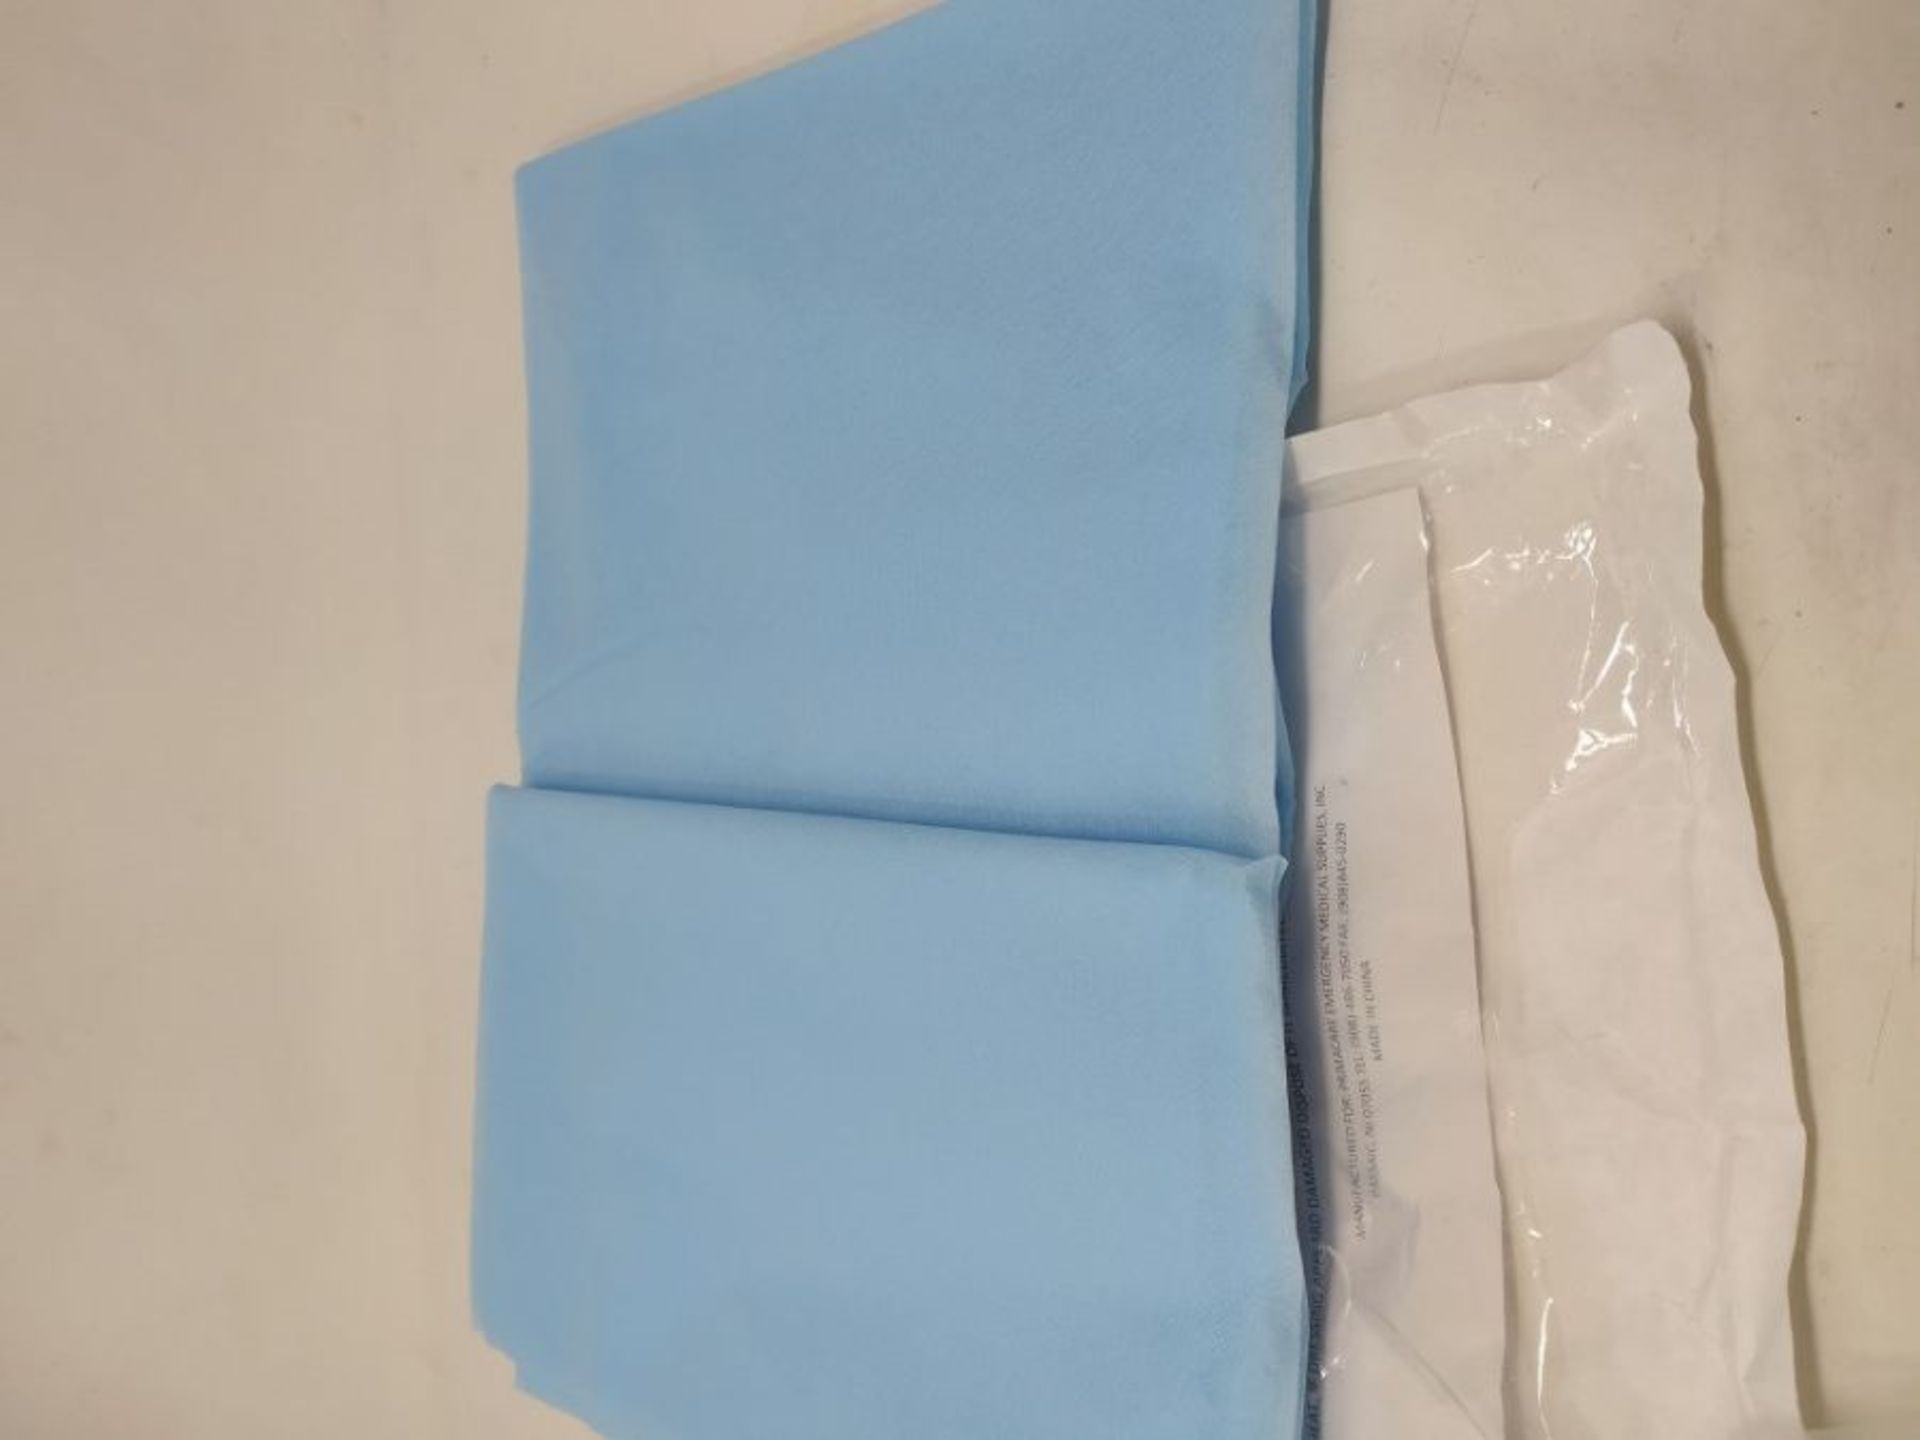 Primacare Sterile Burn Sheets with Latex Exam Gloves - Image 2 of 2